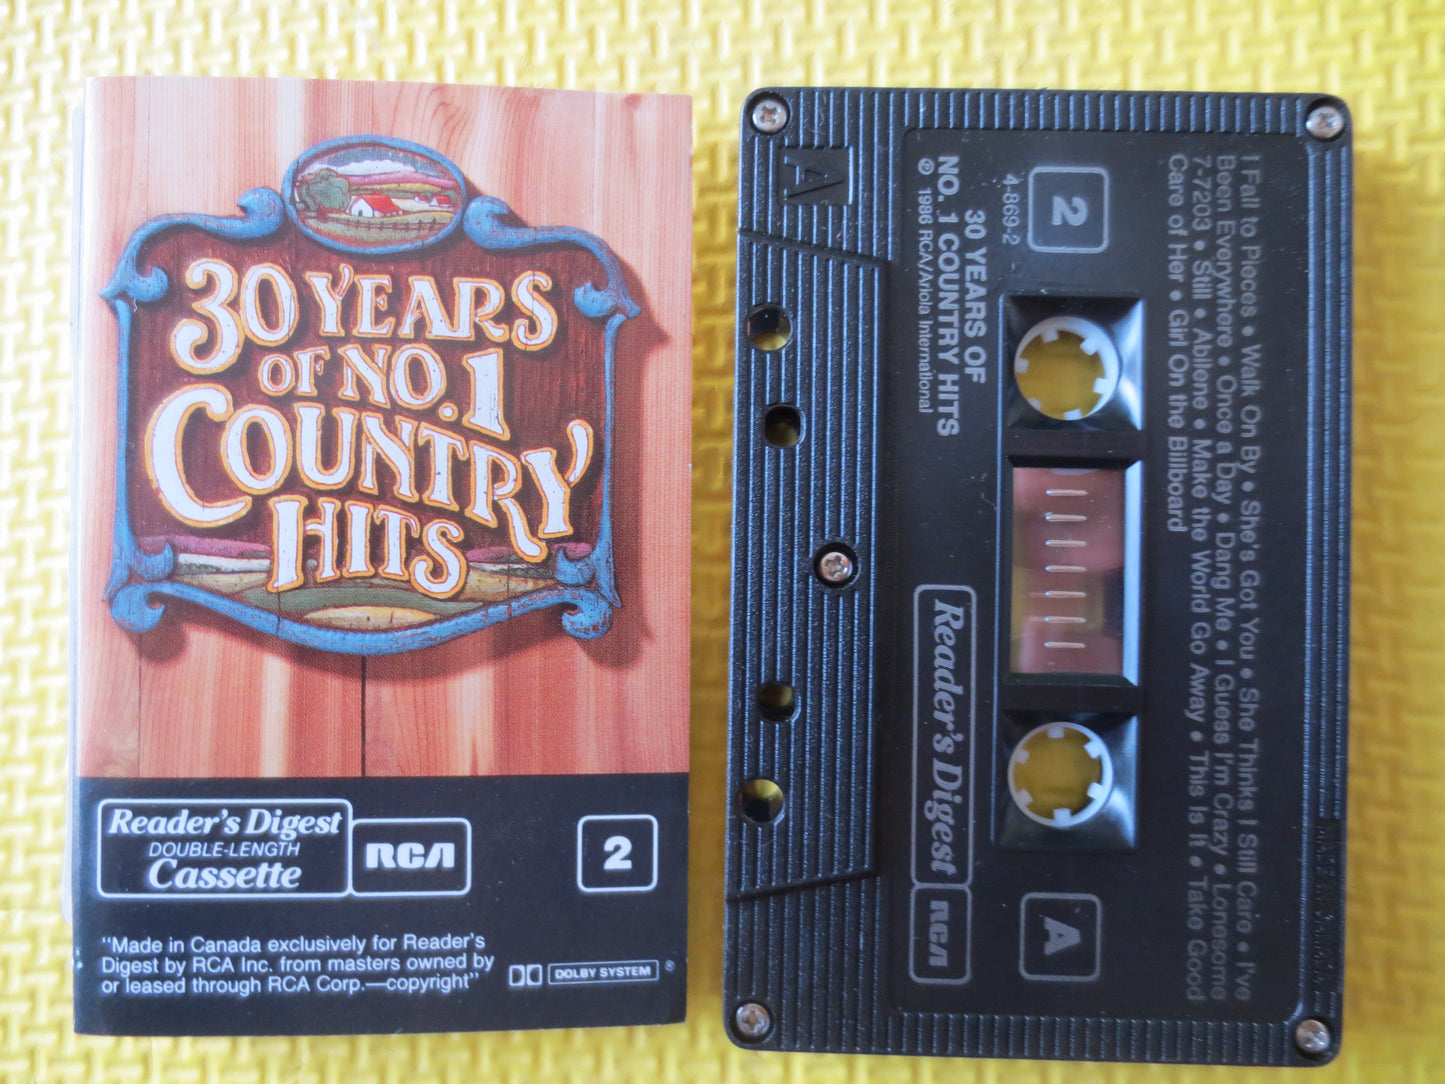 30 Years of NUMBER 1 Hits, COUNTRY Music Tape, Readers Digest Tape, Tape Cassette, Country Cassette, Cassette, 1986 Cassette